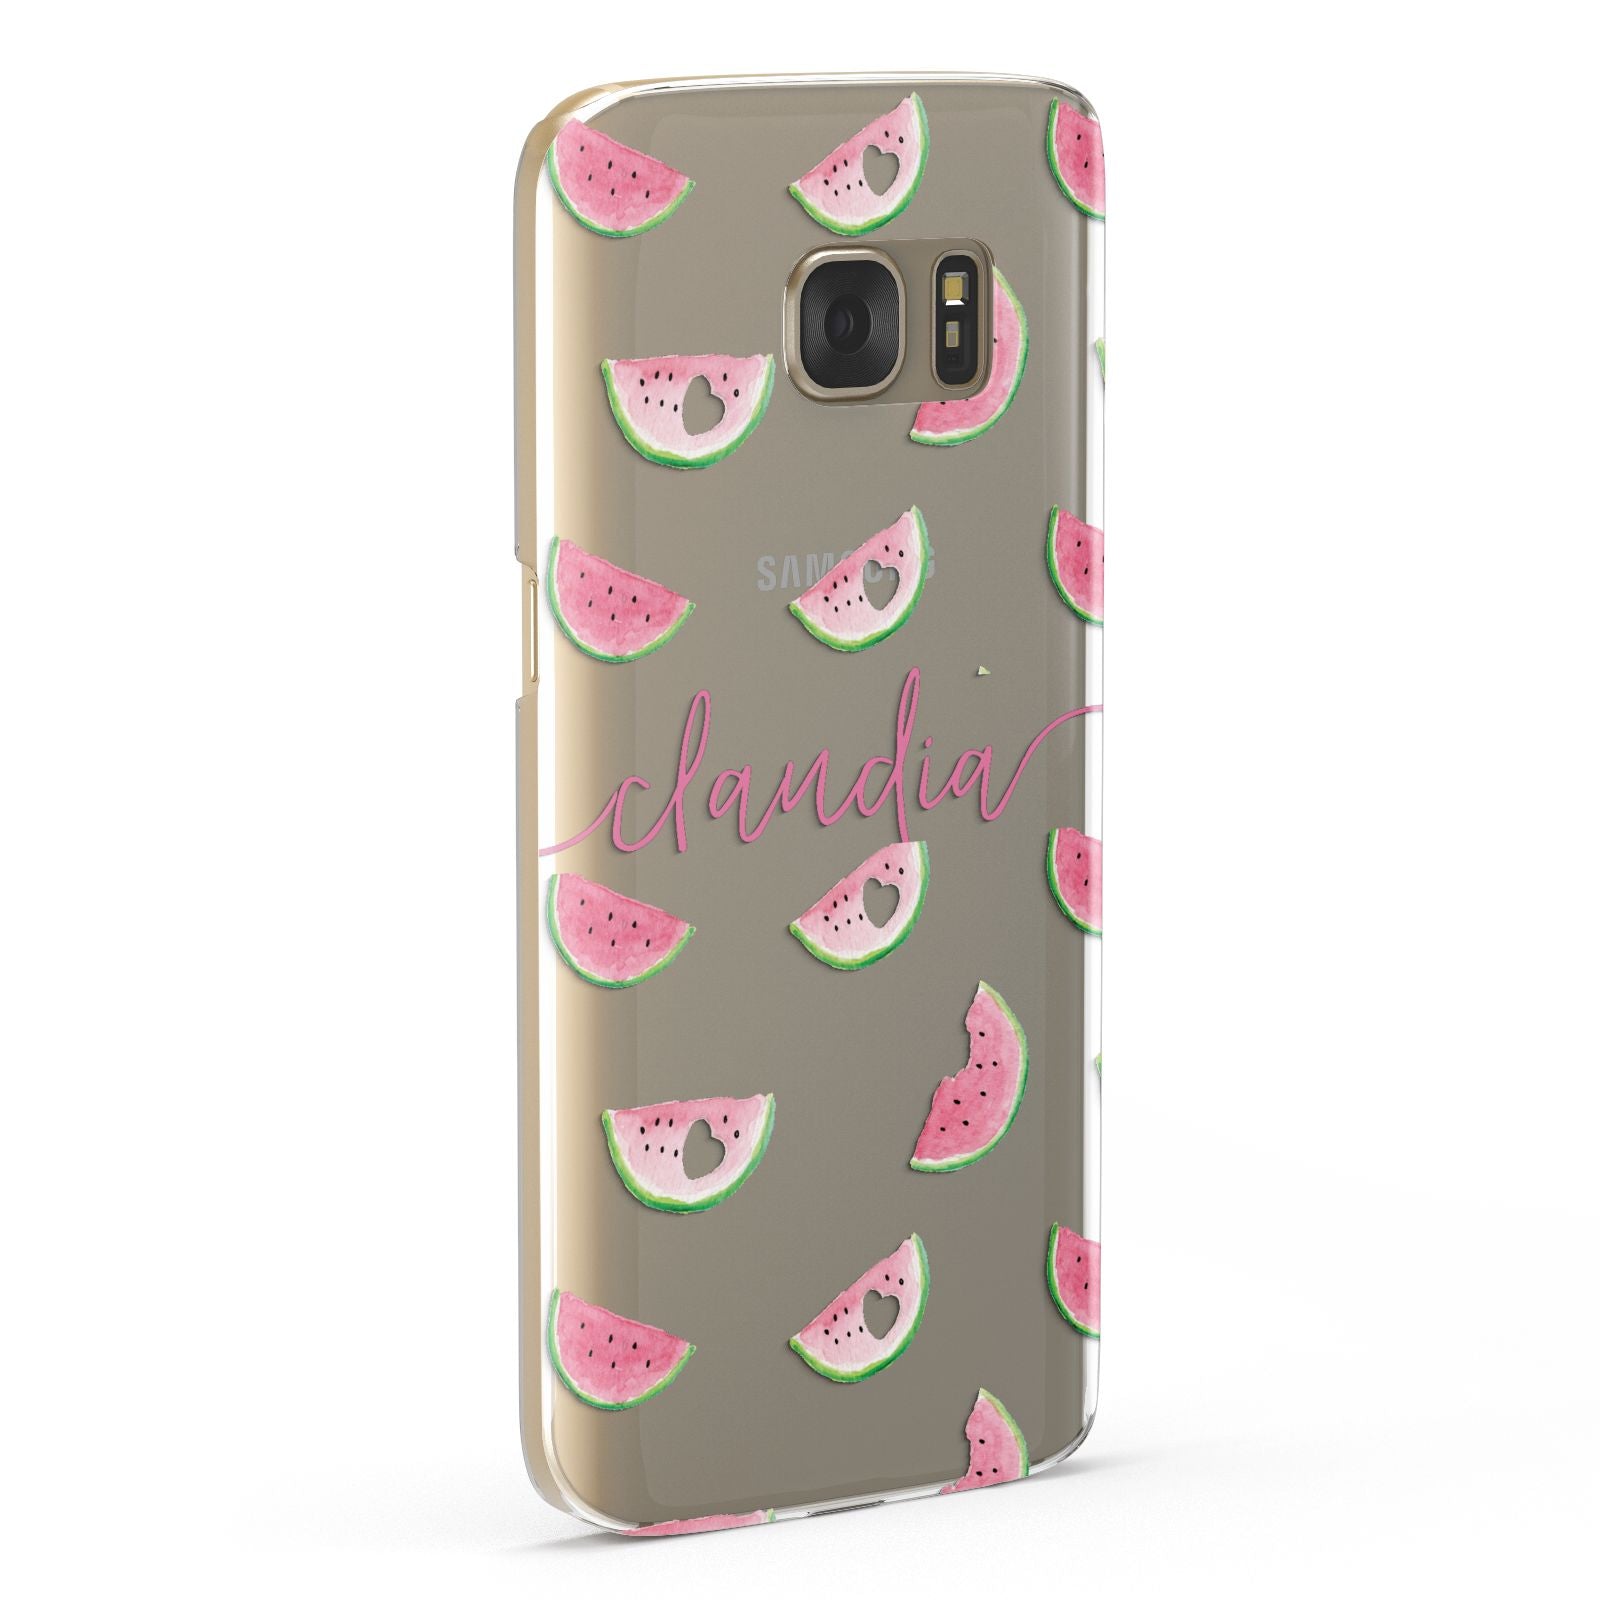 Personalised Transparent Watermelon Samsung Galaxy Case Fourty Five Degrees